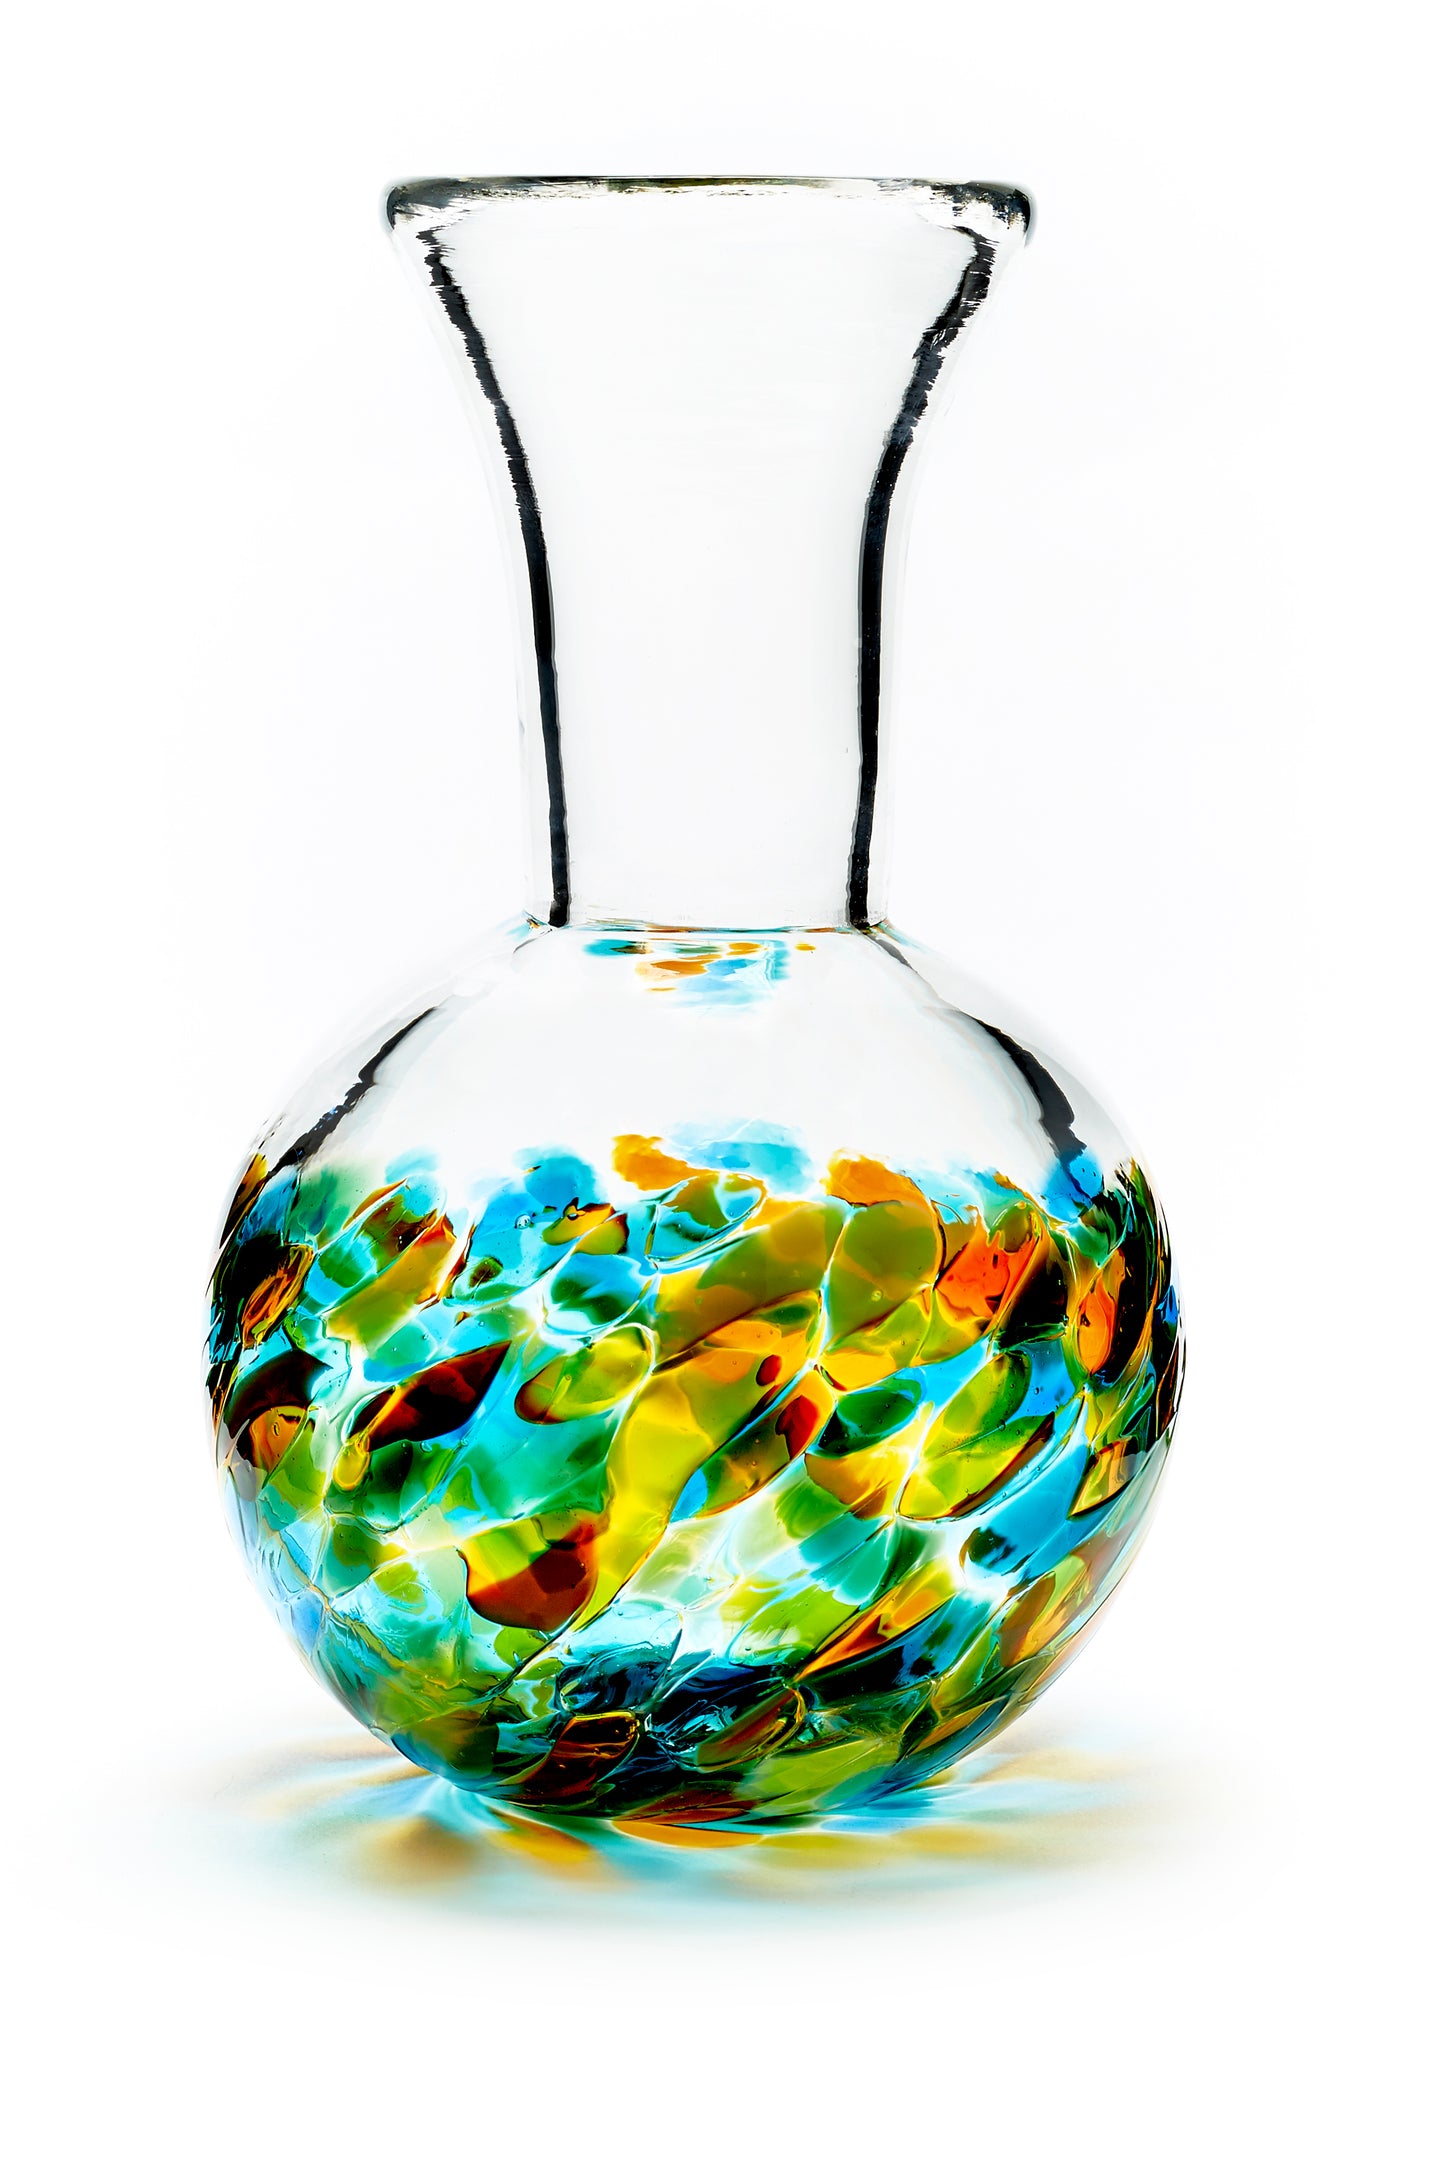 Hand blown glass vase. Teal blue, yellow, and green glass on the bottom. Colour combination is called "Summer."